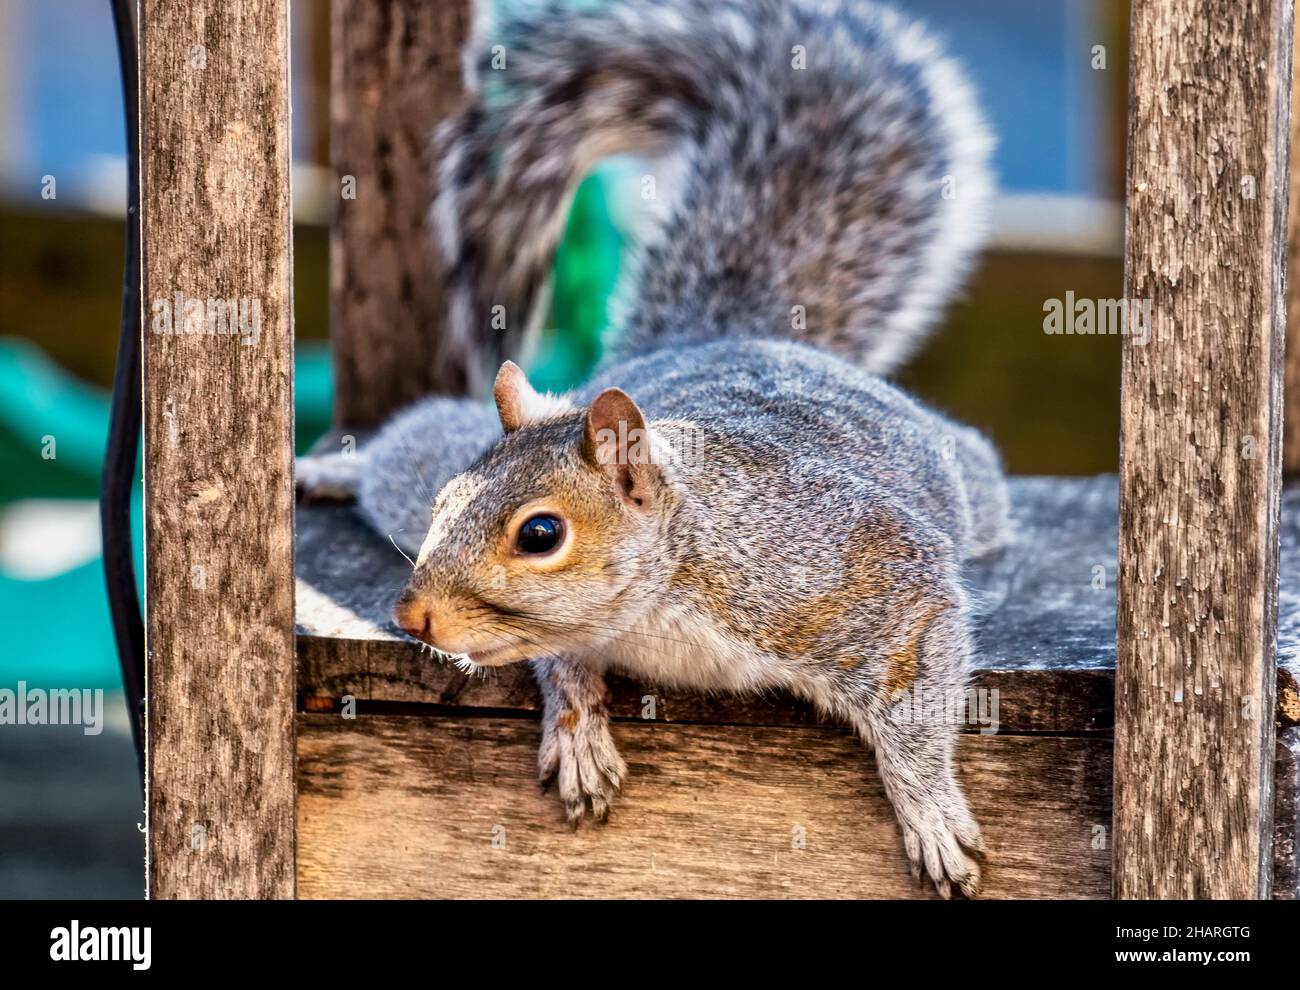 Squirrel under a table on the deck Stock Photo